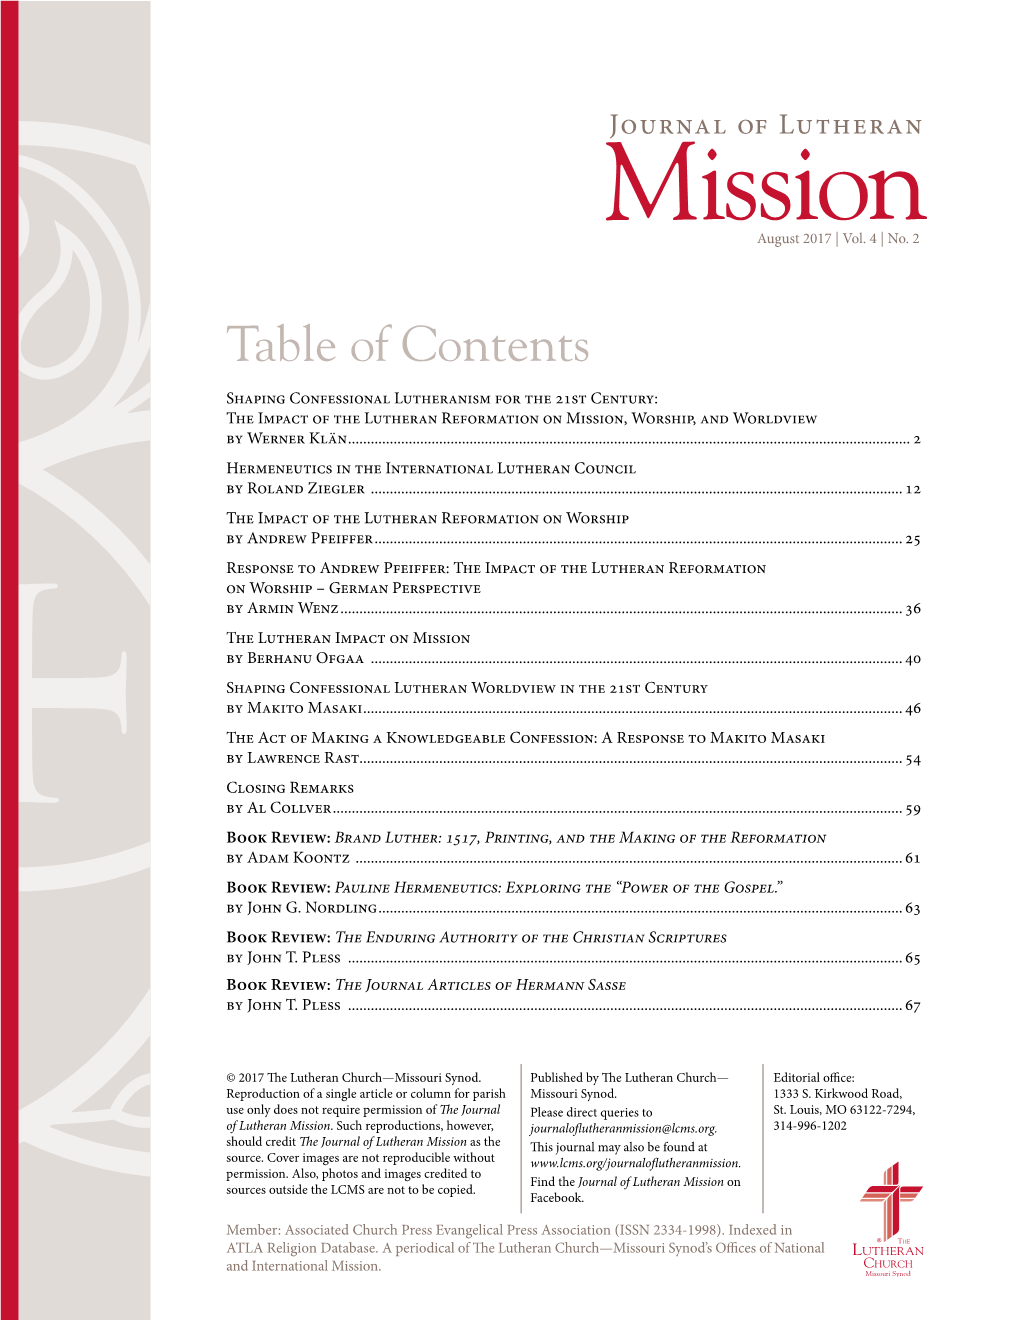 August 2017 Lcms Journal of Lutheran Mission